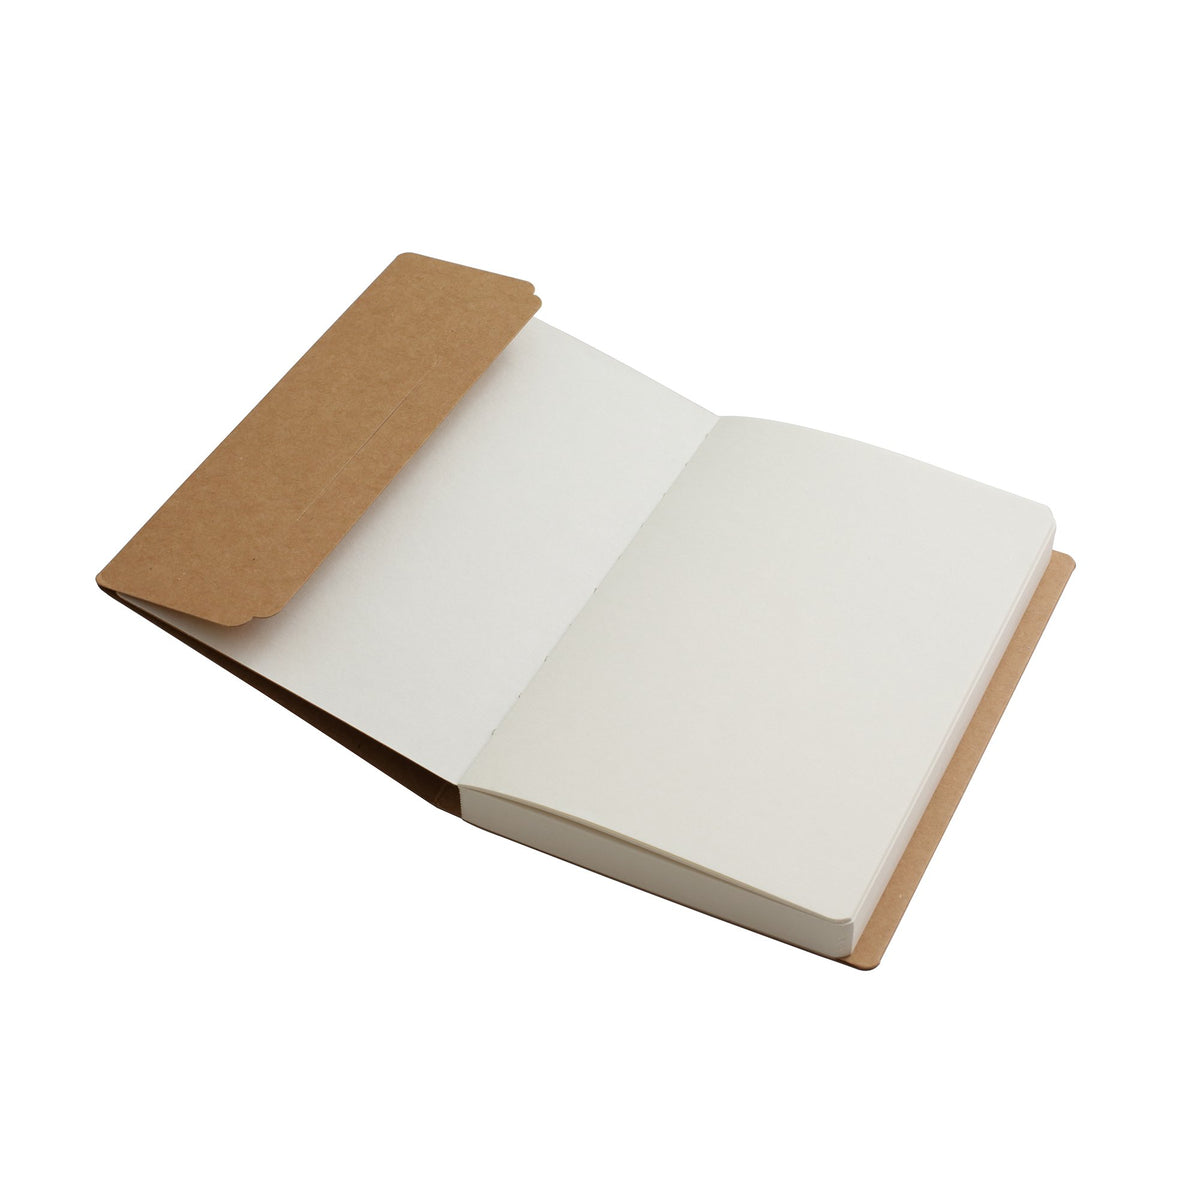 Hahnemuhle Kraft Paper Sketch Book A4 (11.7x8.3 inches) 120gsm 80  Sheets/160 Pages